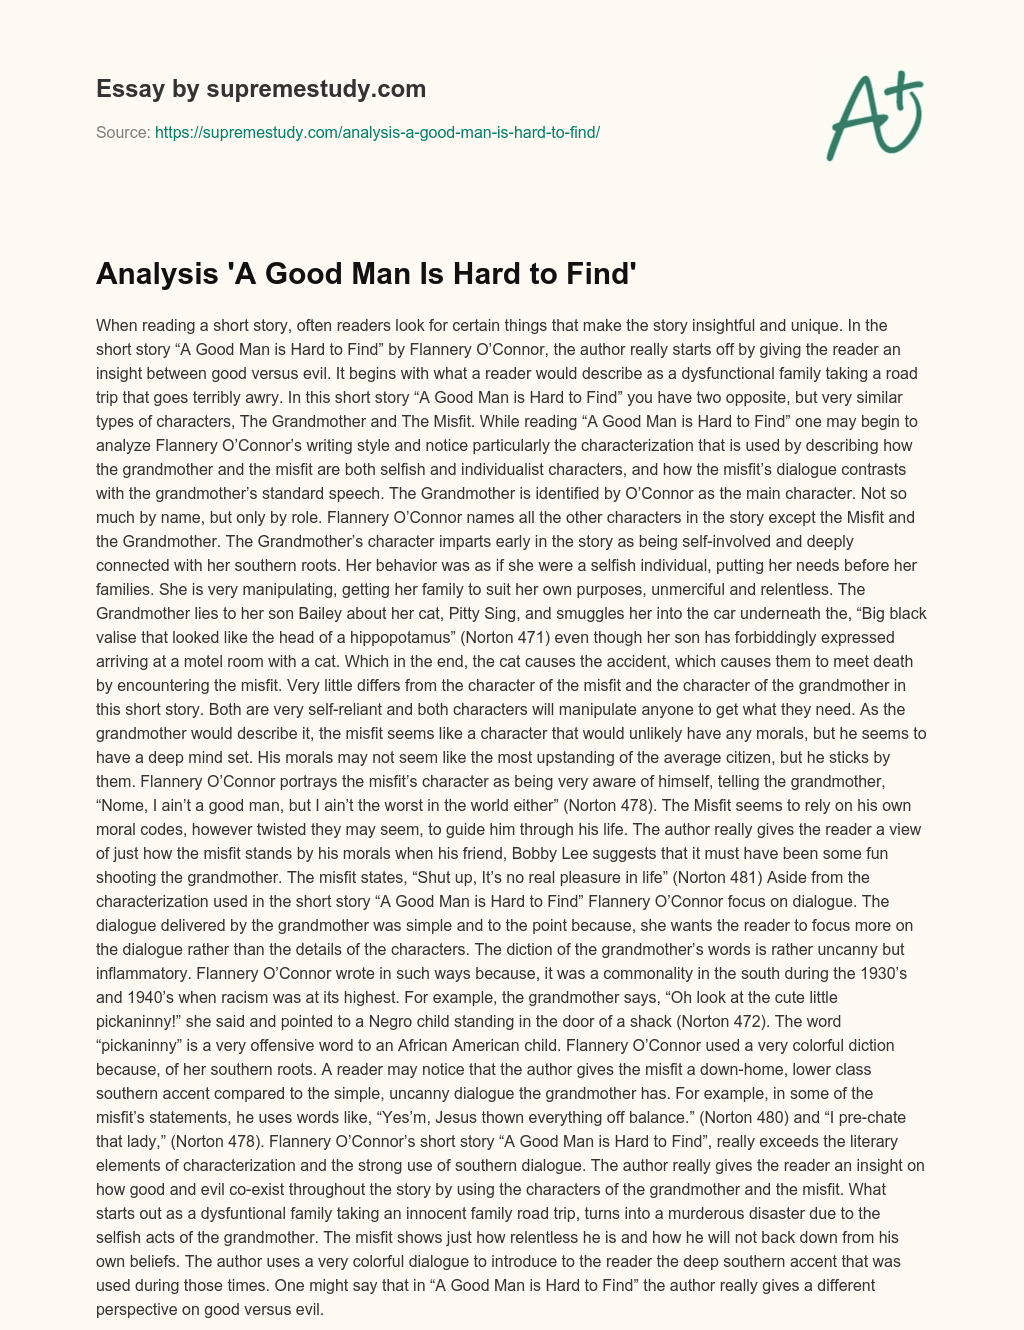 theme of a good man is hard to find essay